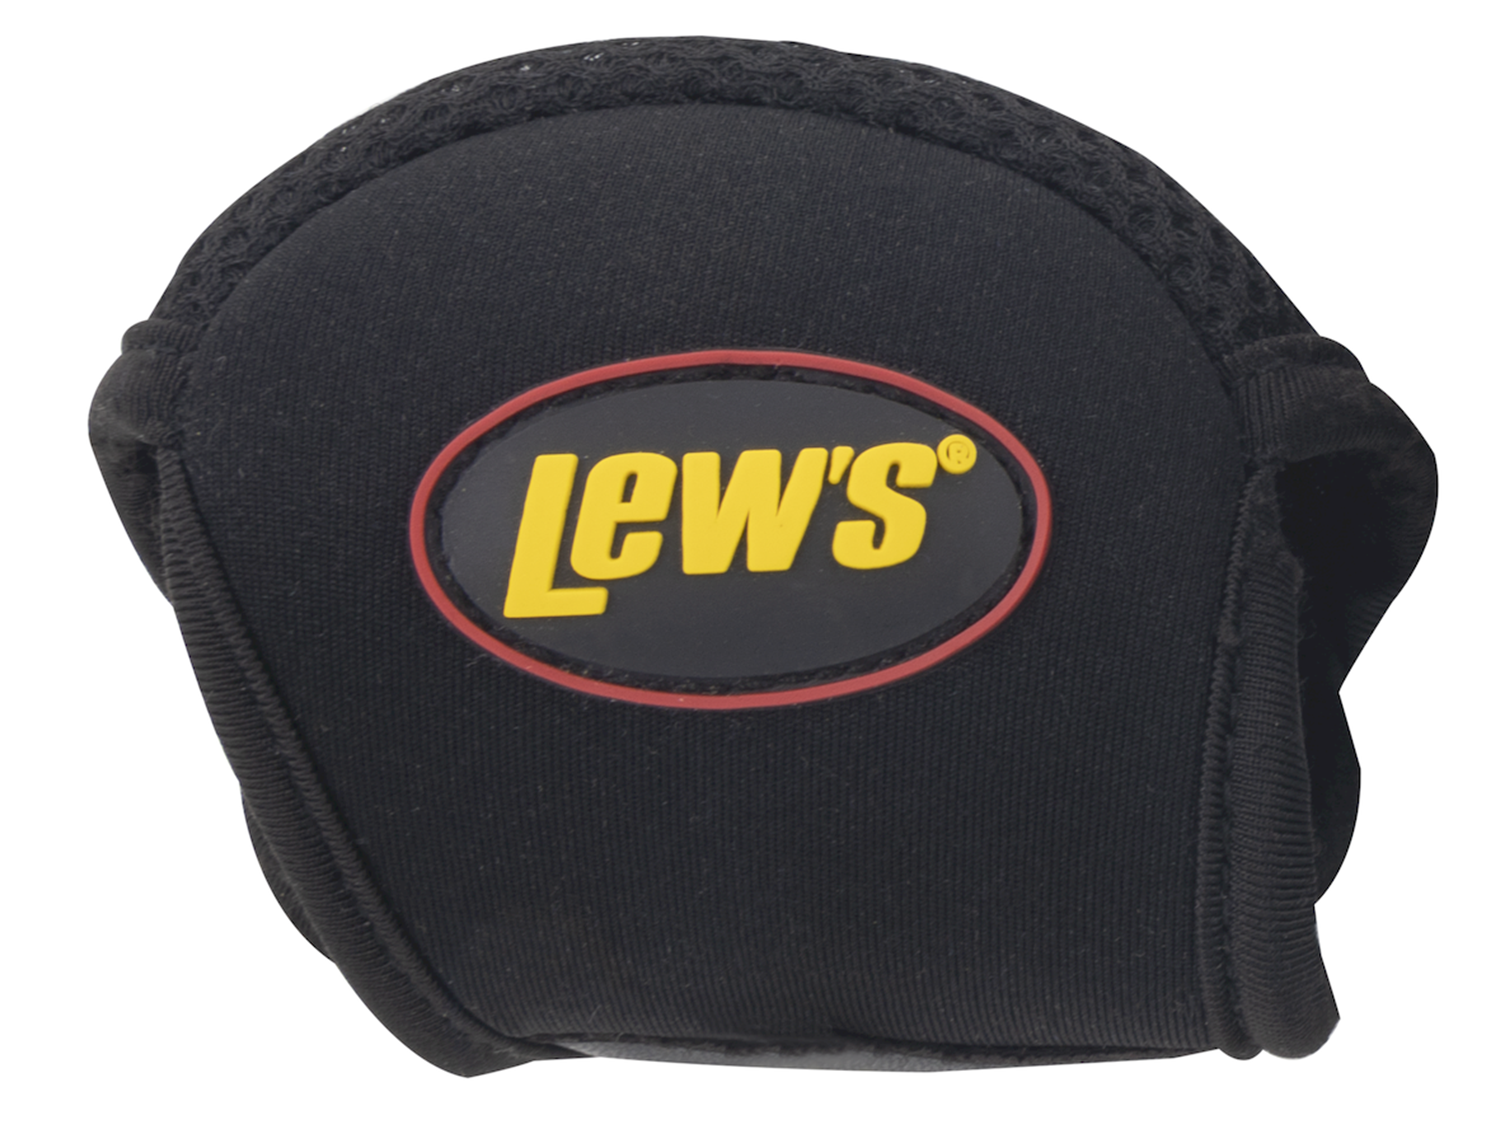 Lew's 4683-1146 Speed Reel Cover, Bc Low Profile Sz300